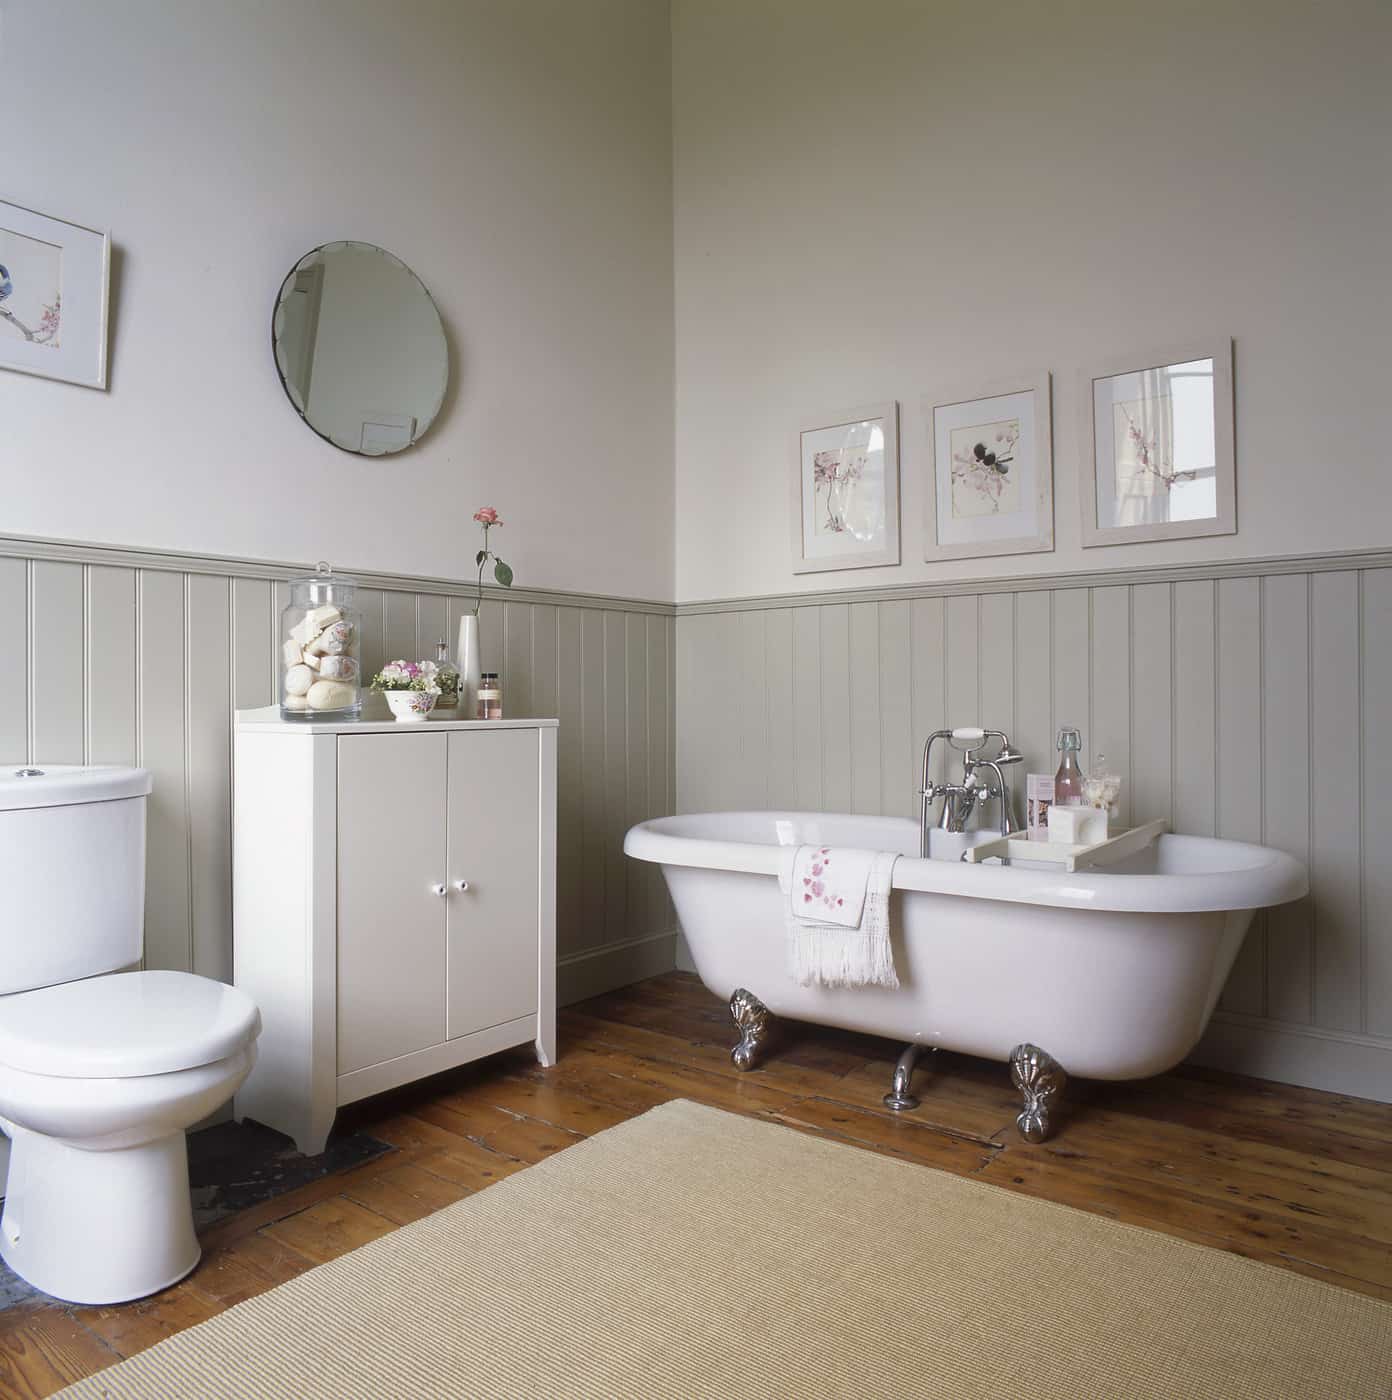 Pastel gray screams vintage appeal. Add a vintage bathtub to the space to complete the look. Just because it is gray does not mean that it needs to be boring.